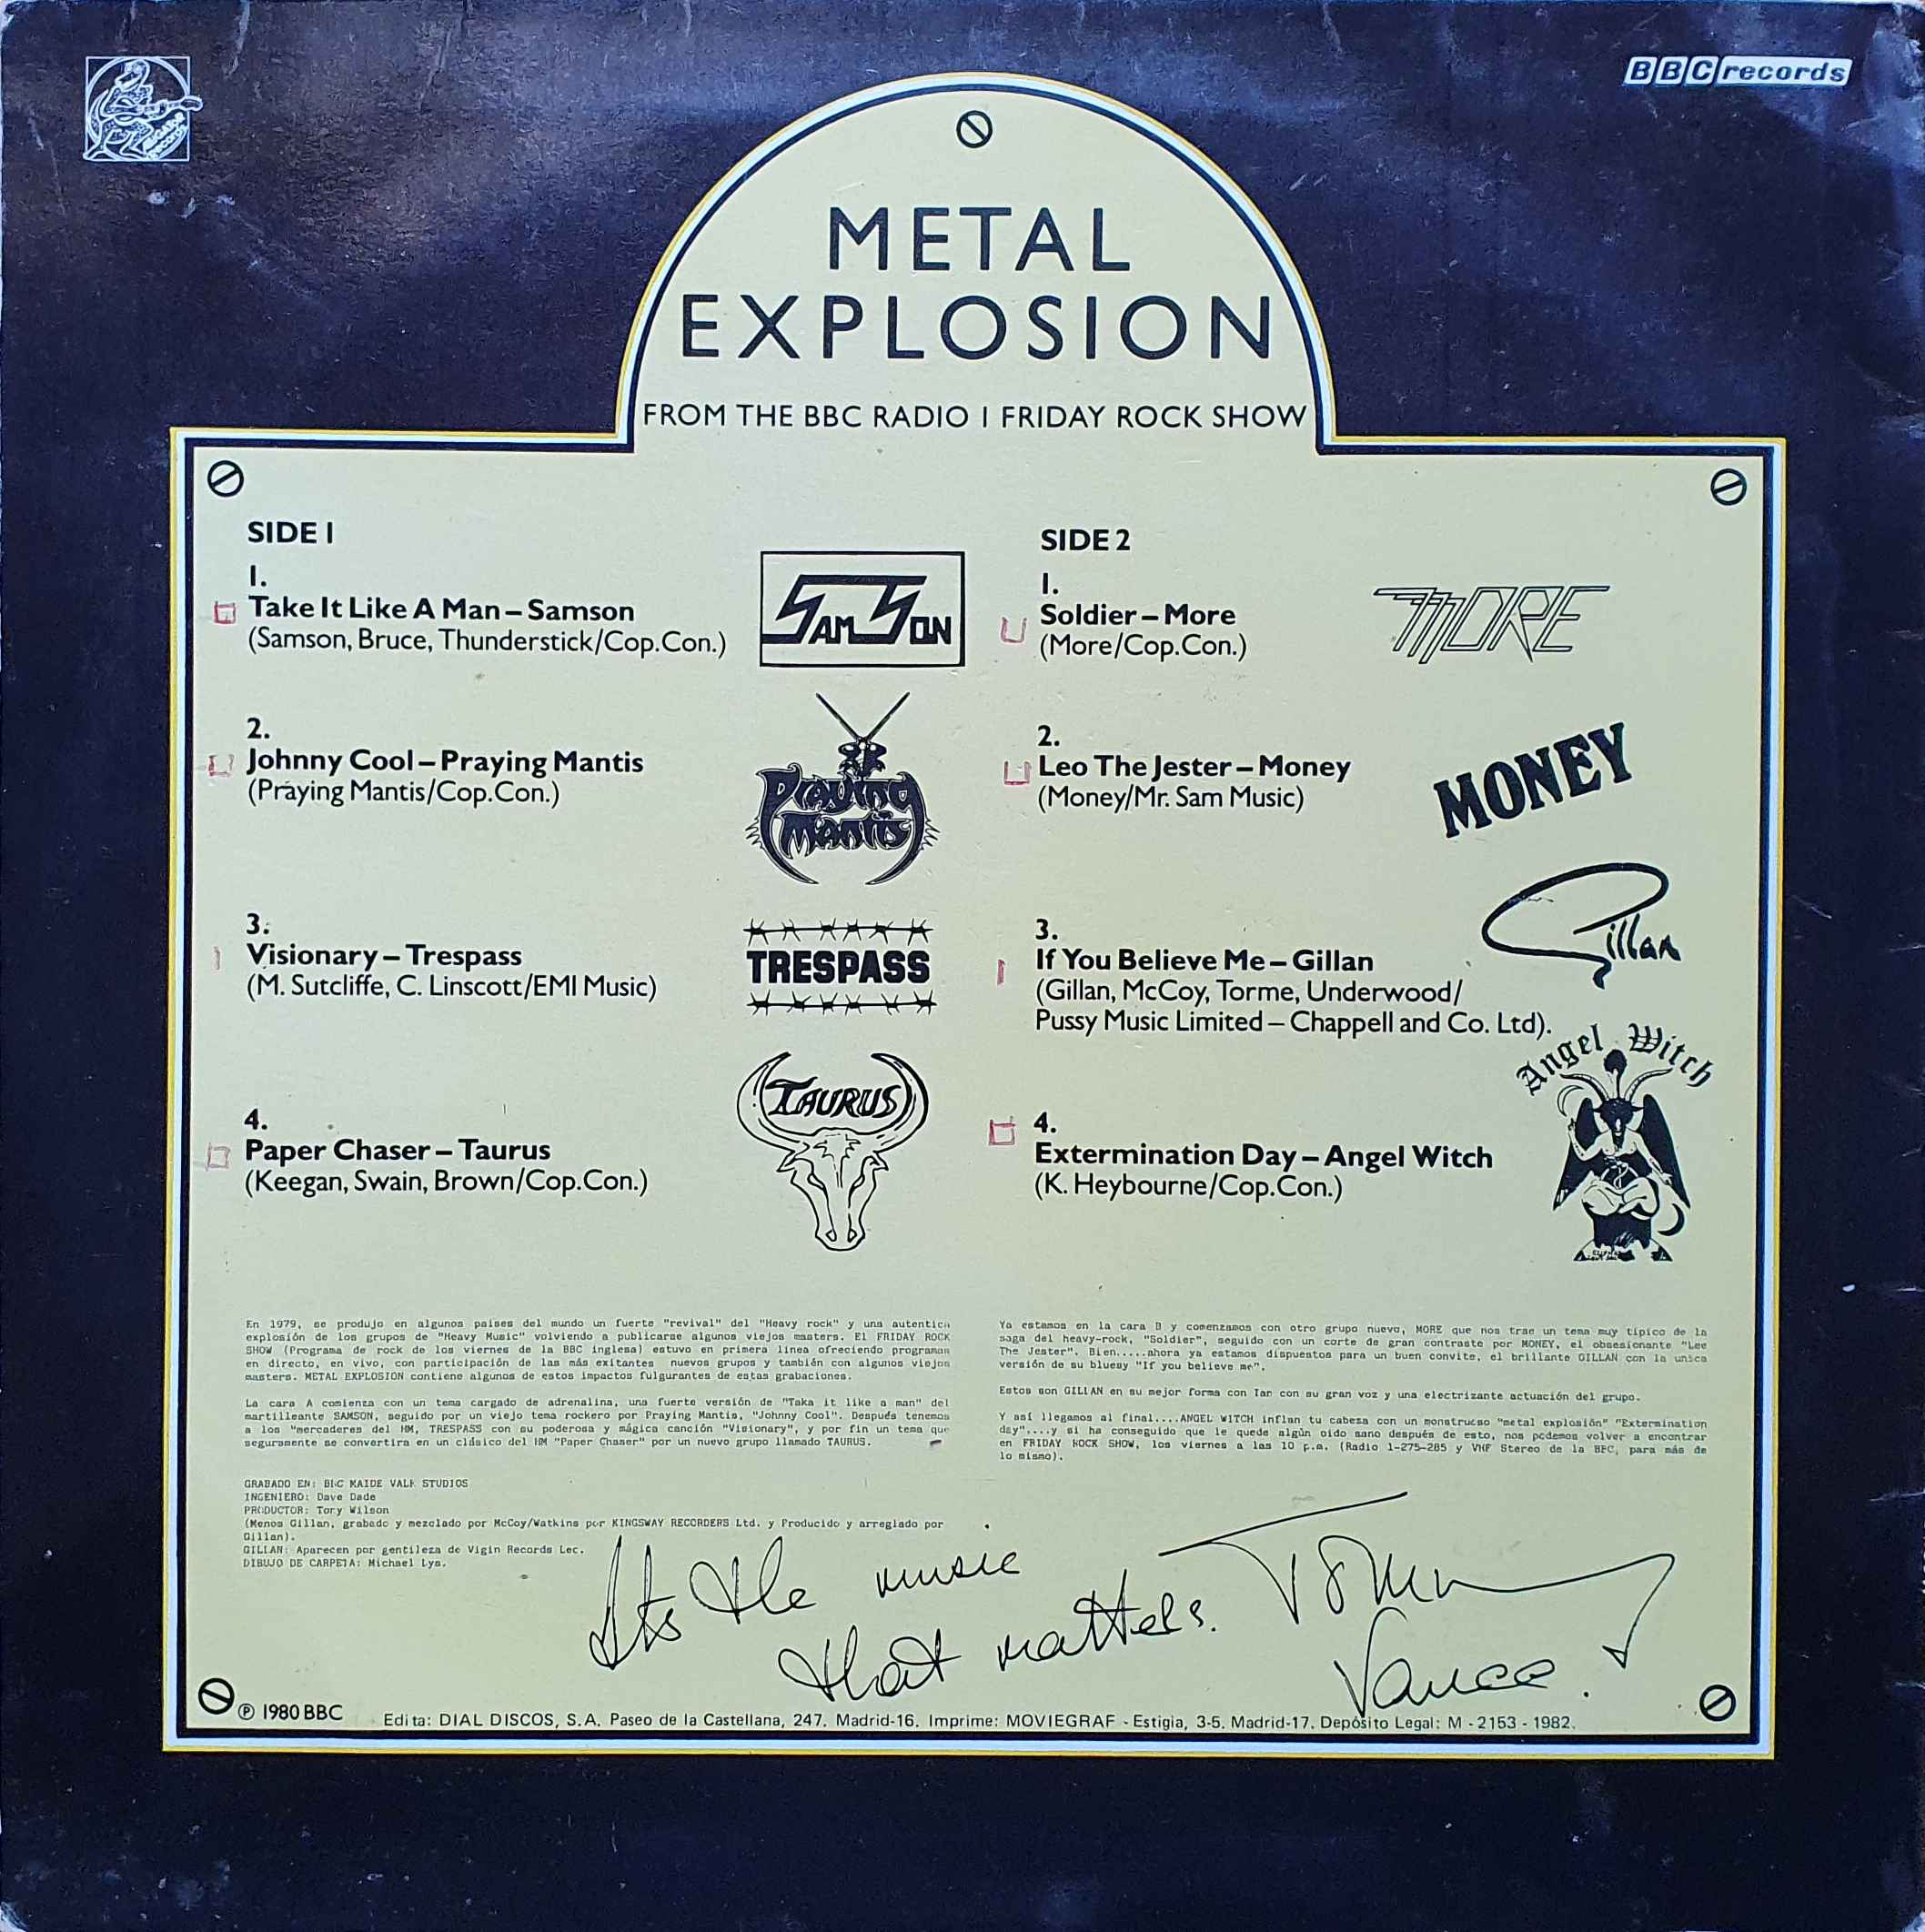 Picture of 51.8011 Metal explosion from The Friday Rock Show by artist Various from the BBC records and Tapes library